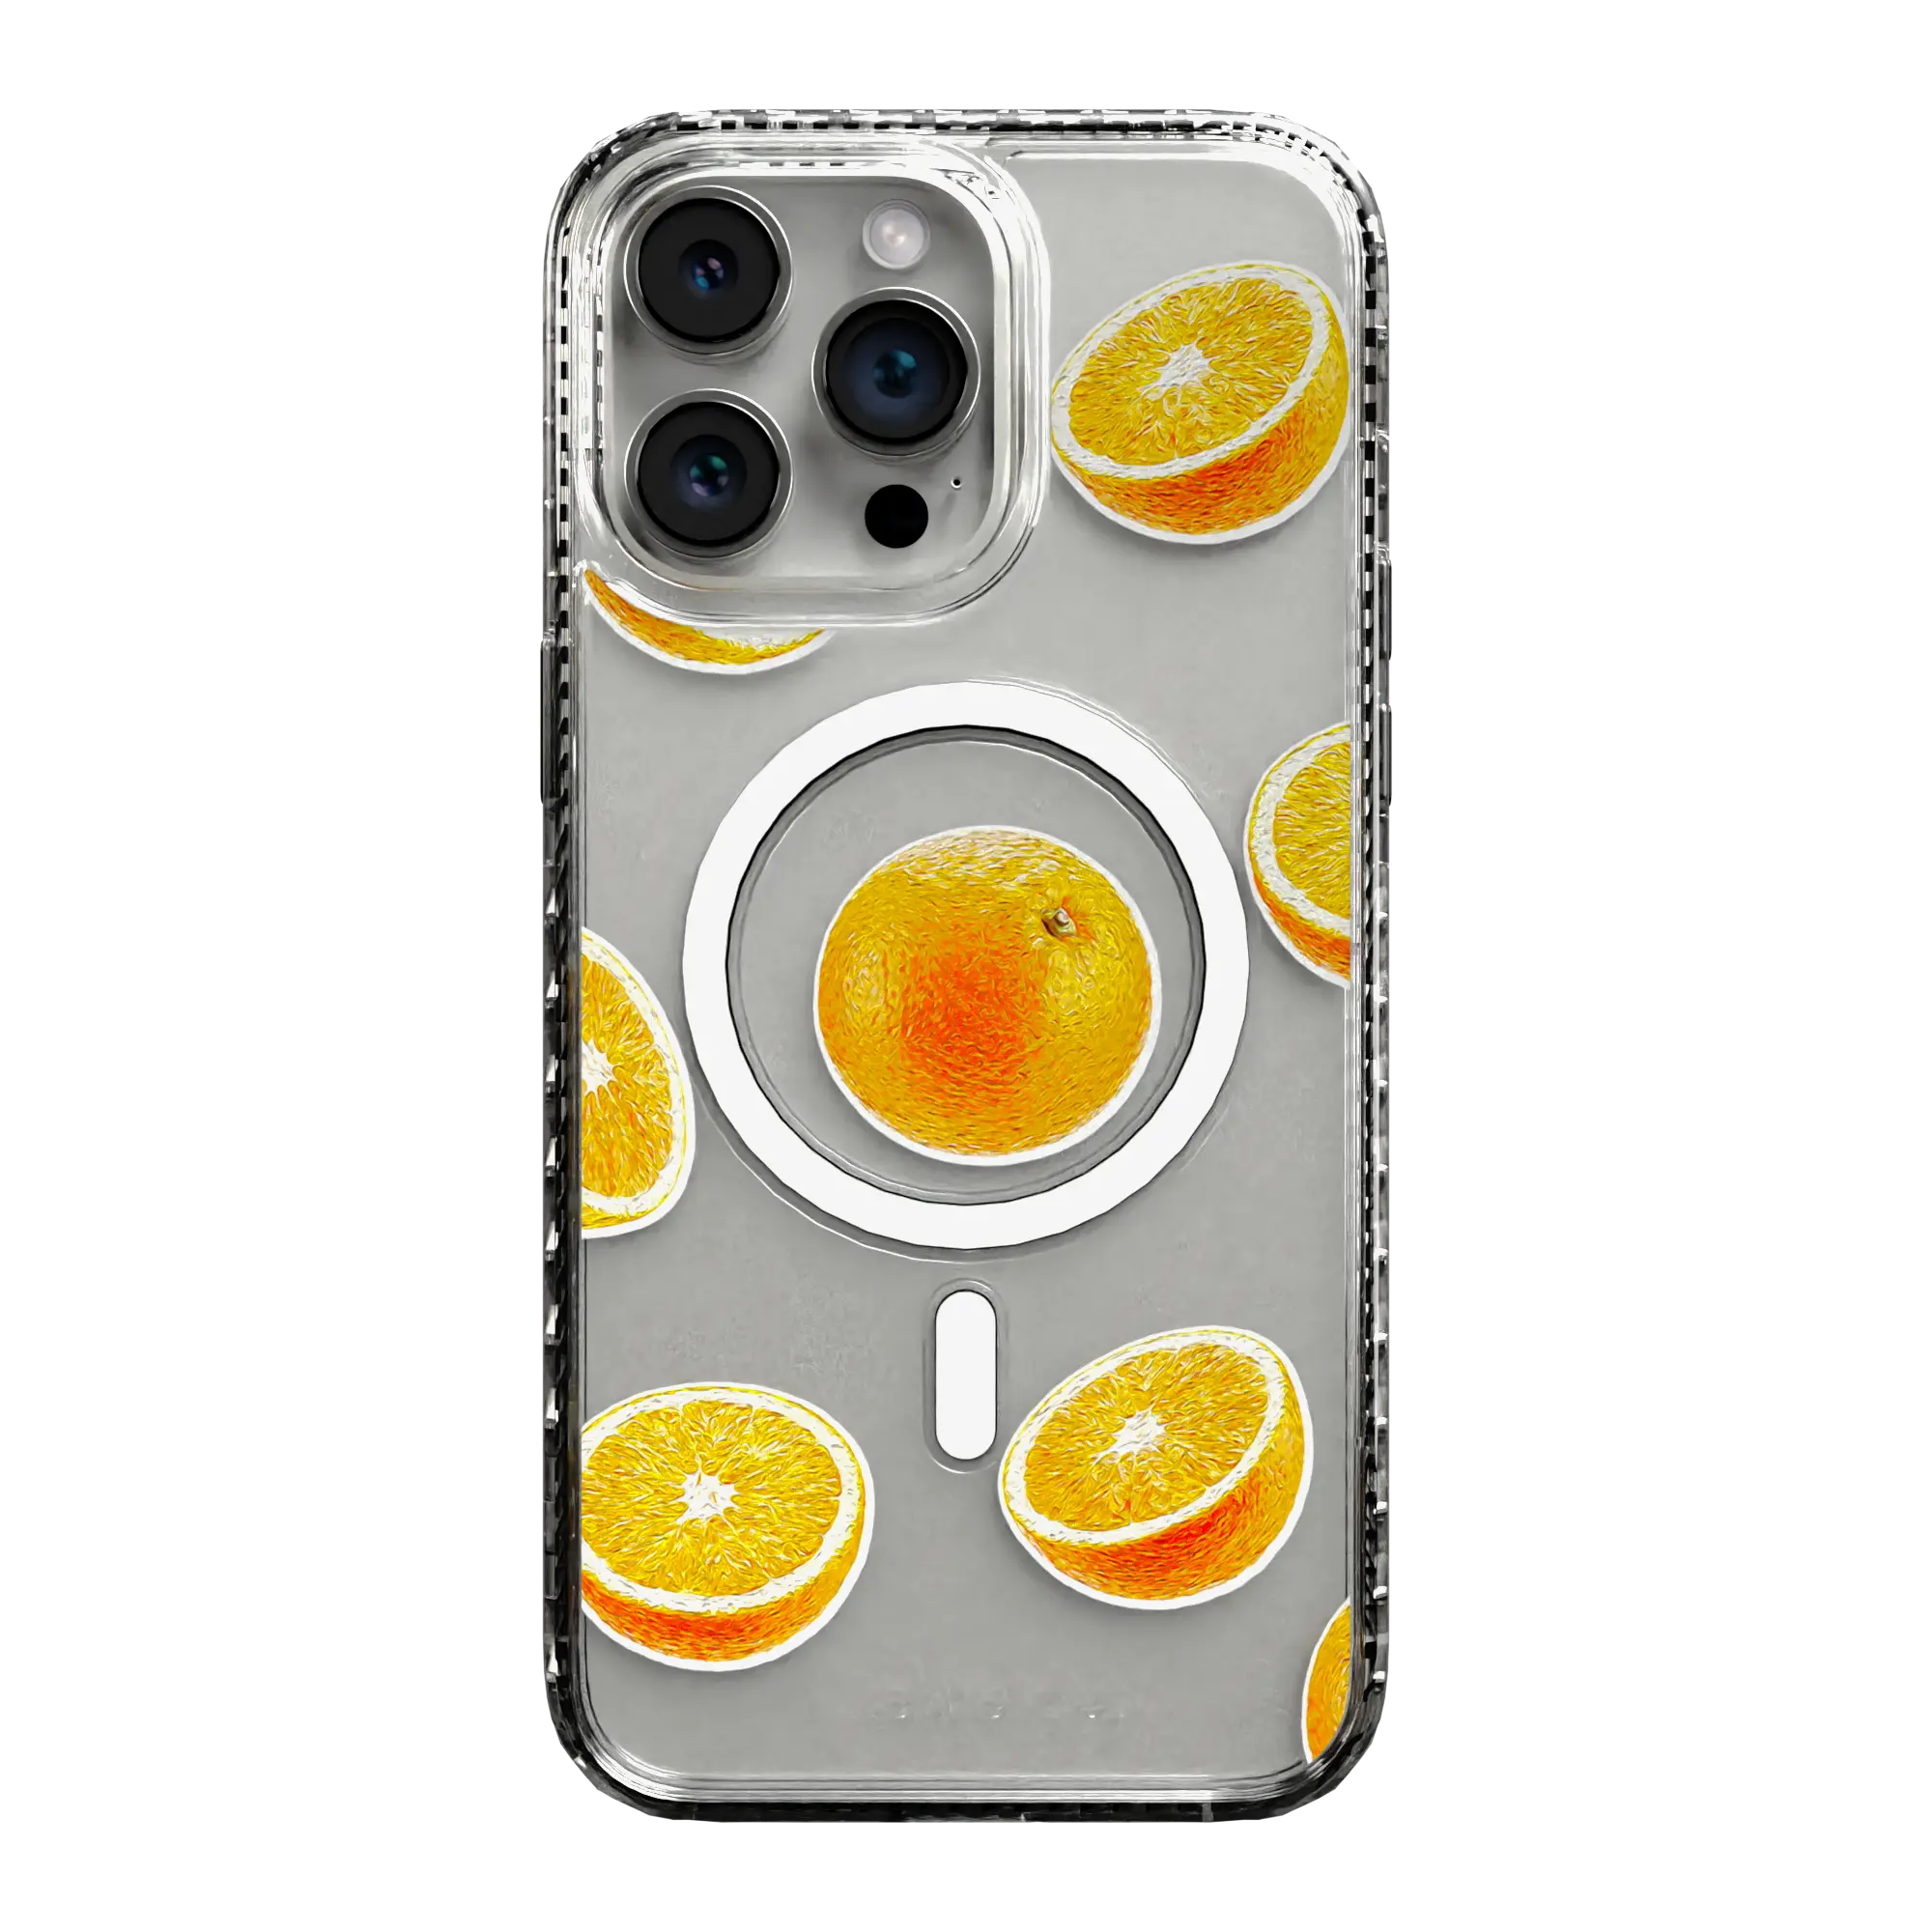 Apple-iPhone-15-Pro-Max-Crystal-Clear Orange Zest | Protective MagSafe Case | Fruits Collection for Apple iPhone 15 Series cellhelmet cellhelmet